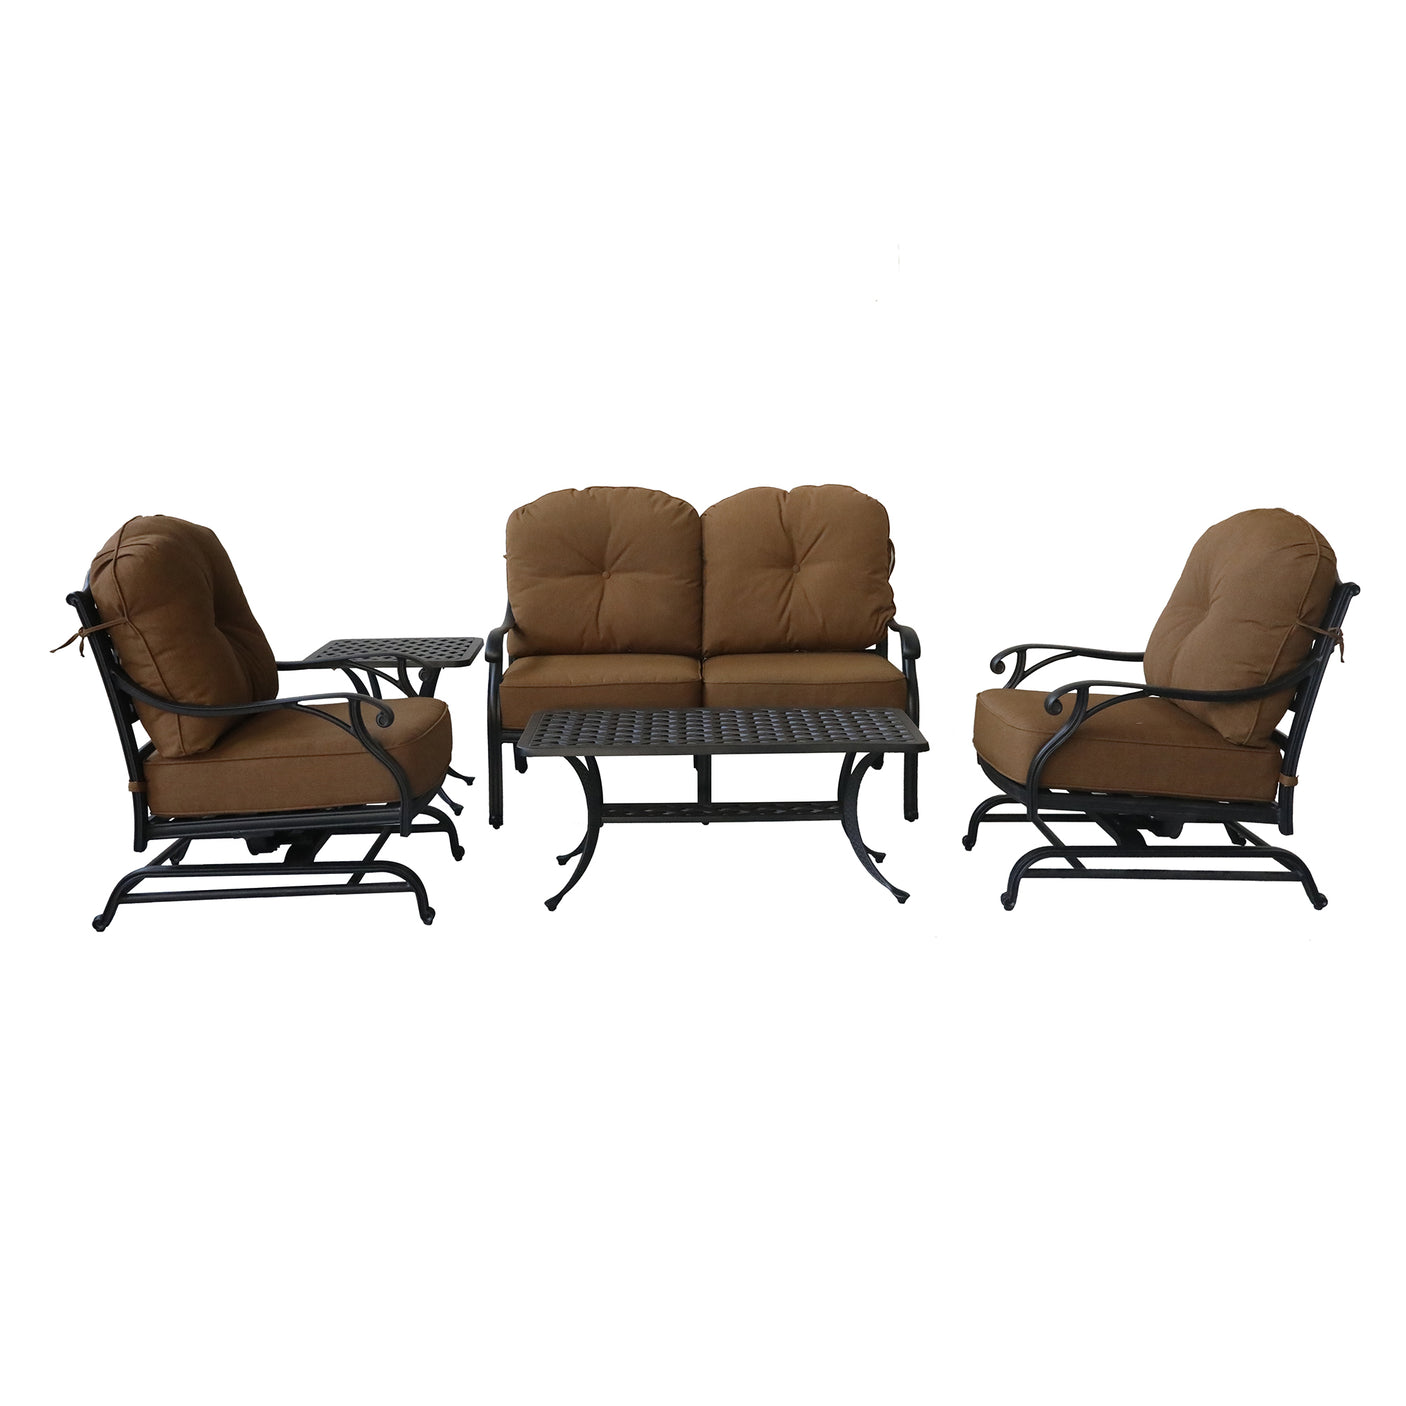 Cast Aluminum 5 Piece Sofa Seating Group with Cushions, Brown